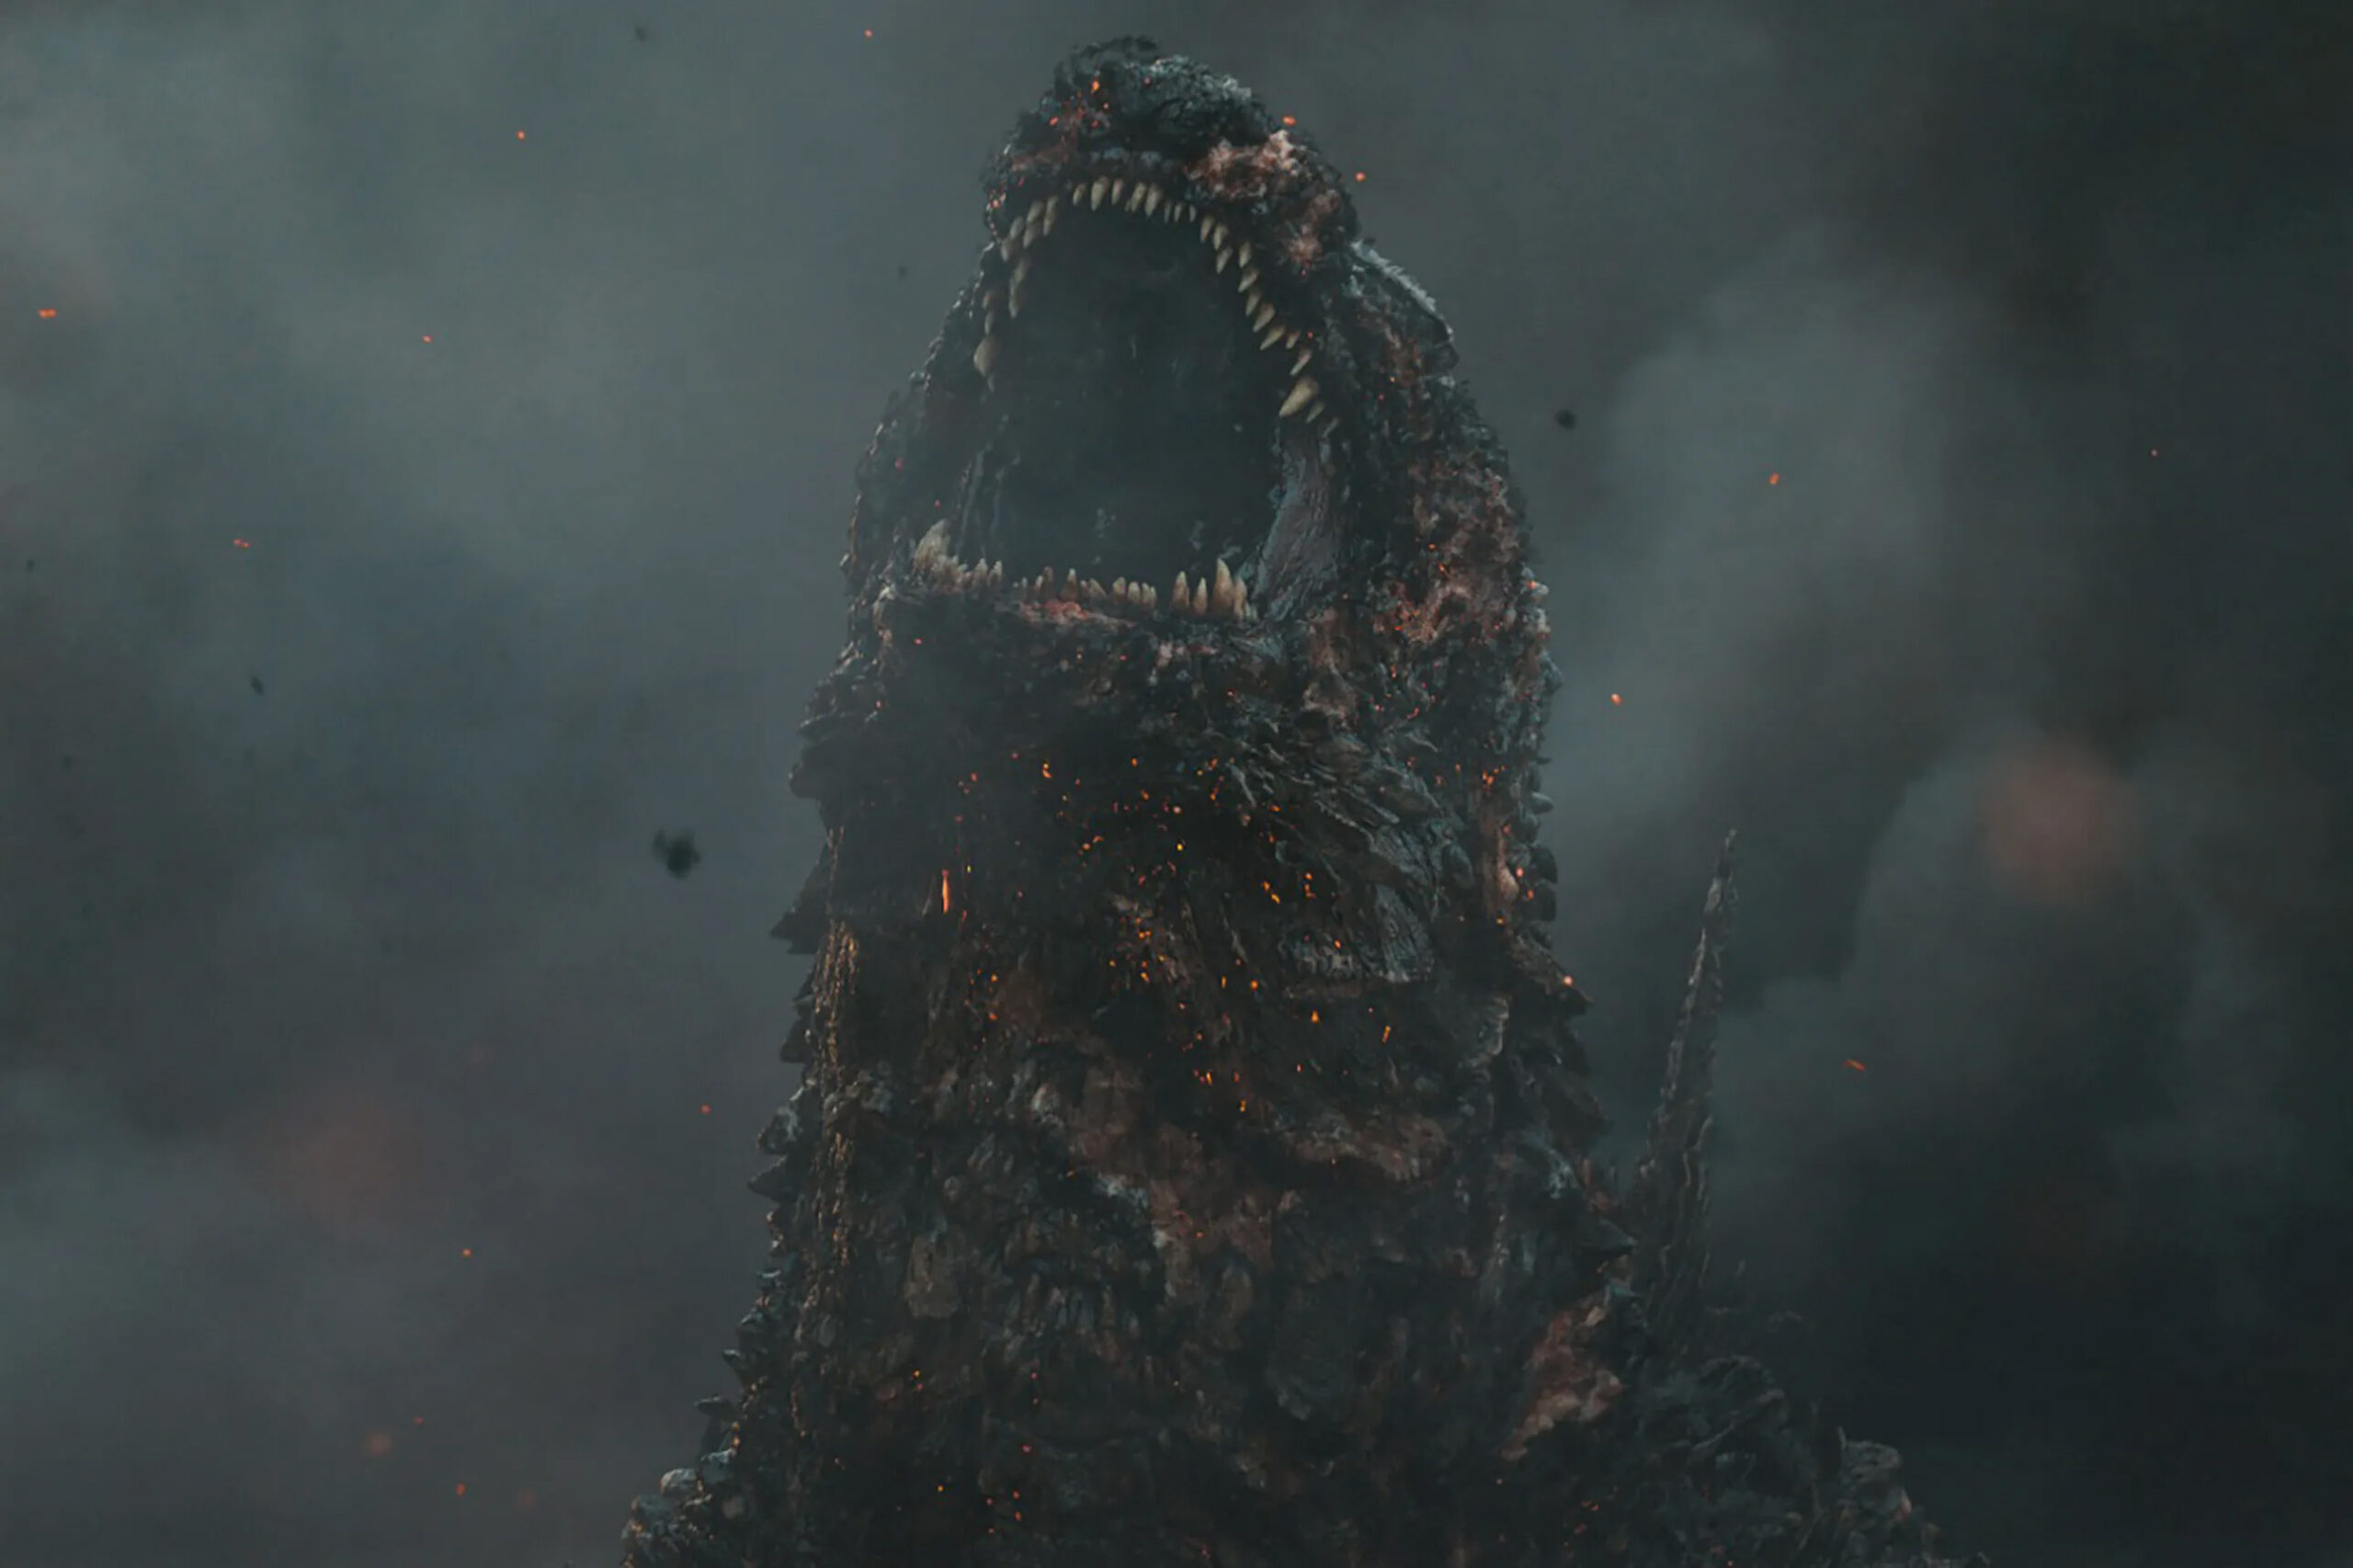 Godzilla Minus One Earned Best Use of Visual Effects from Chicago Film Critics Association